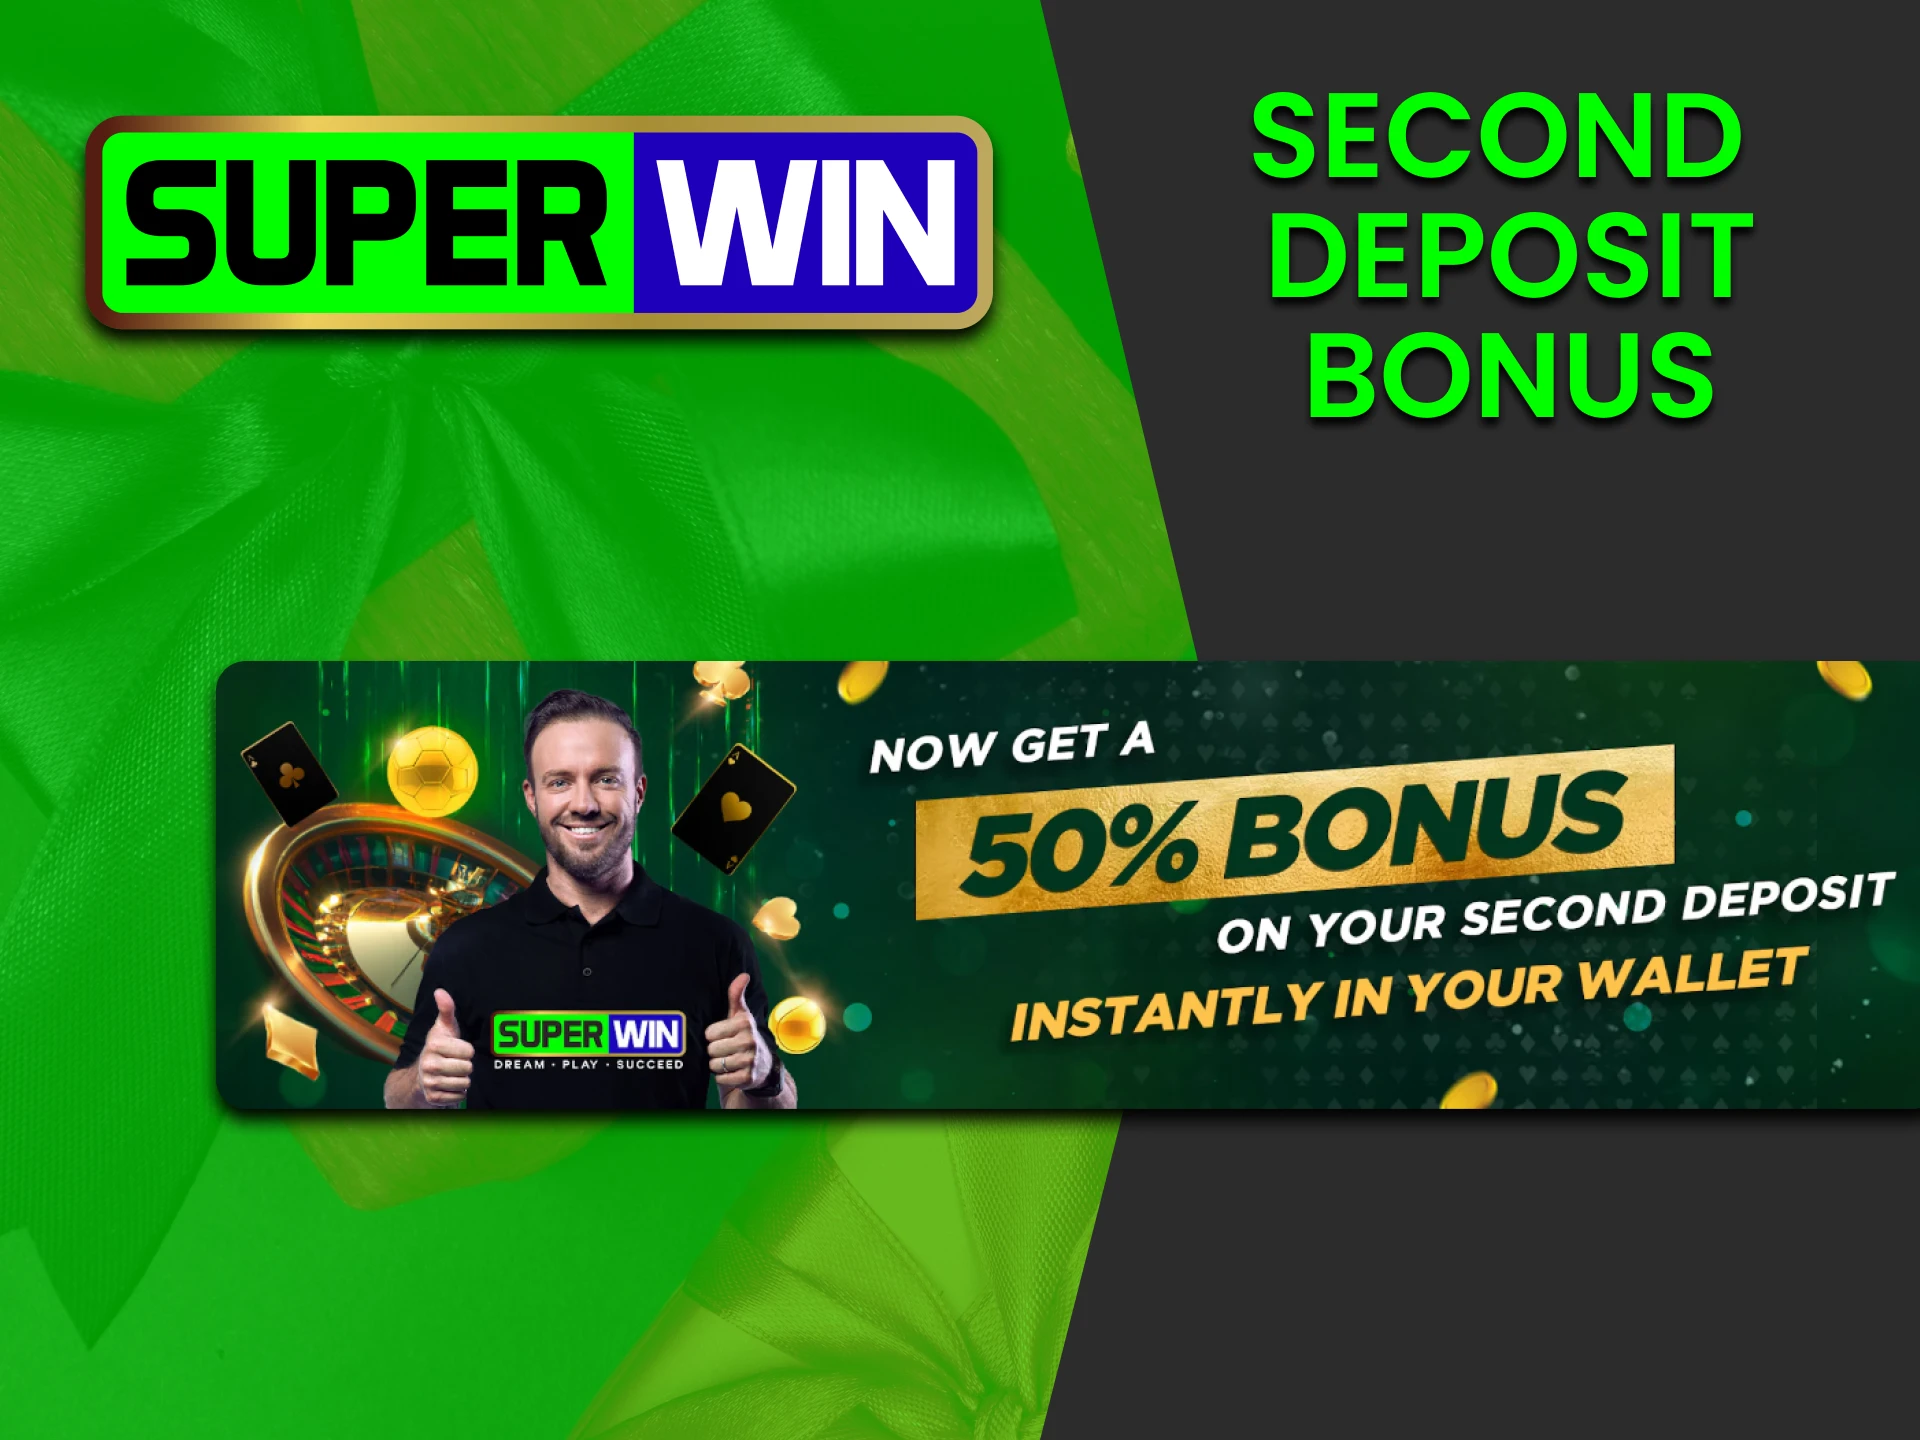 Find out what bonus Superwin gives you when you make a second deposit.